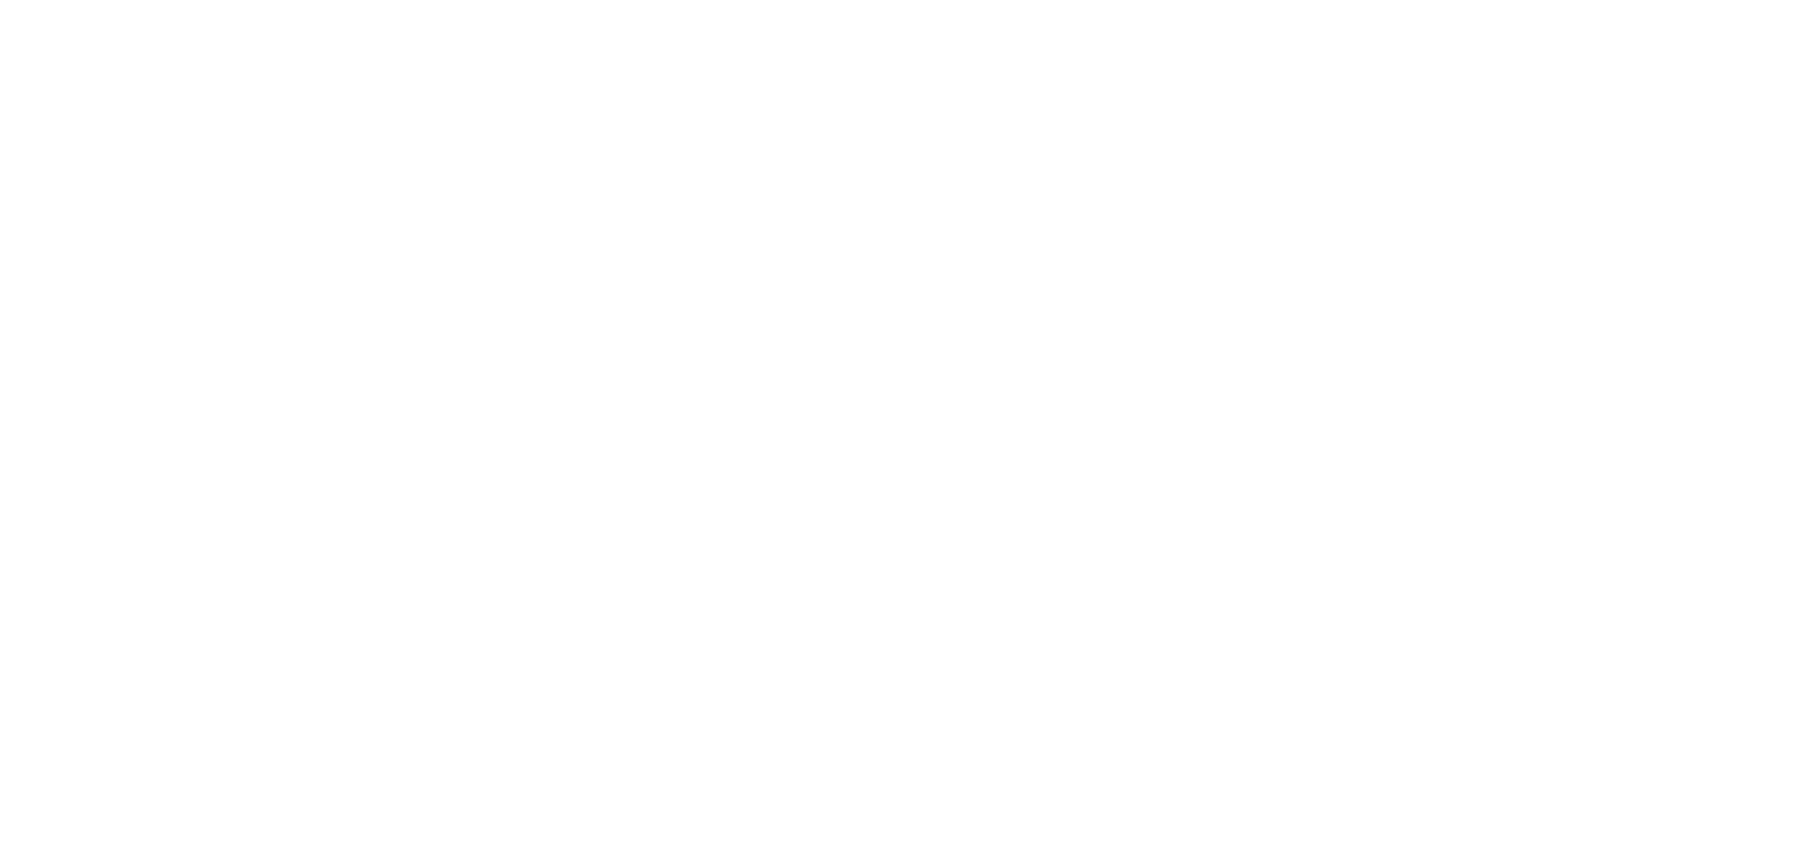 Approximately $30 million in assets